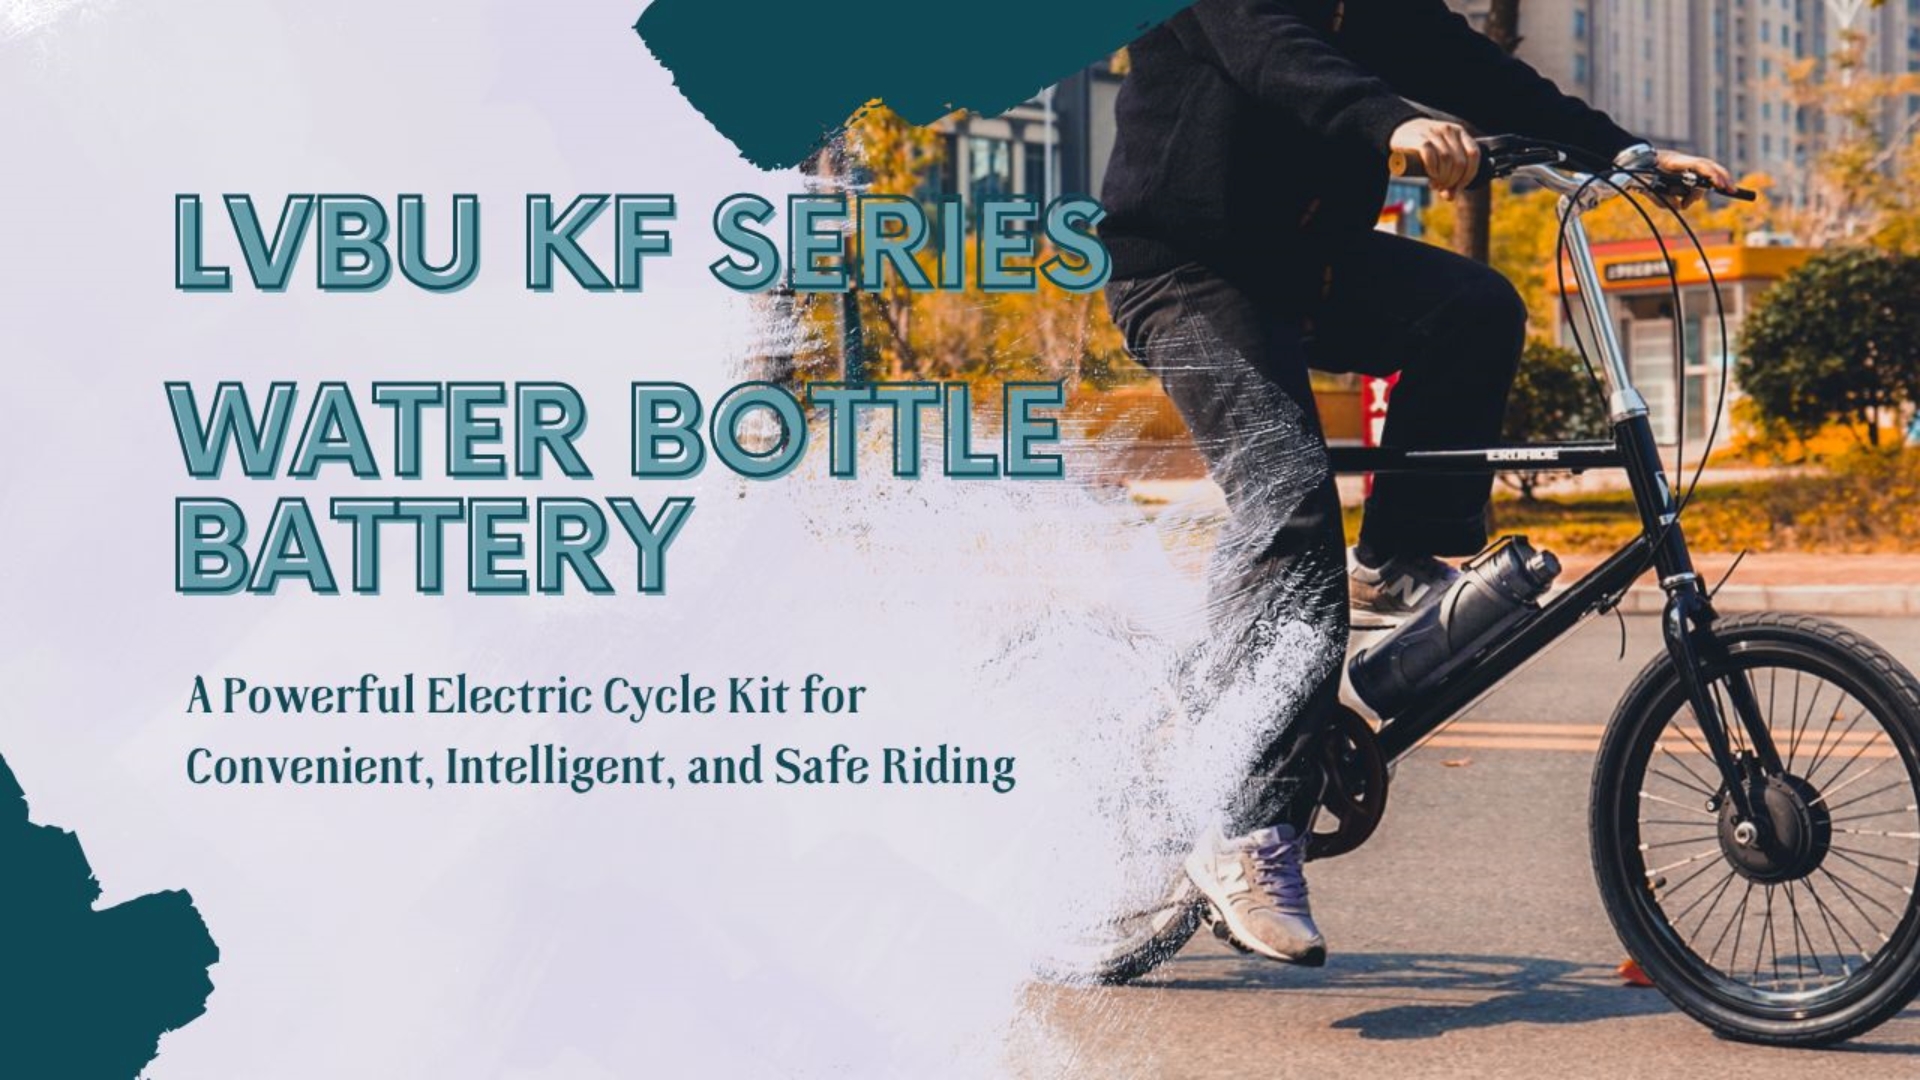 The Lvbu KF Water Bottle Series: A Powerful Electric Cycle Kit for Convenient, Intelligent, and Safe Riding